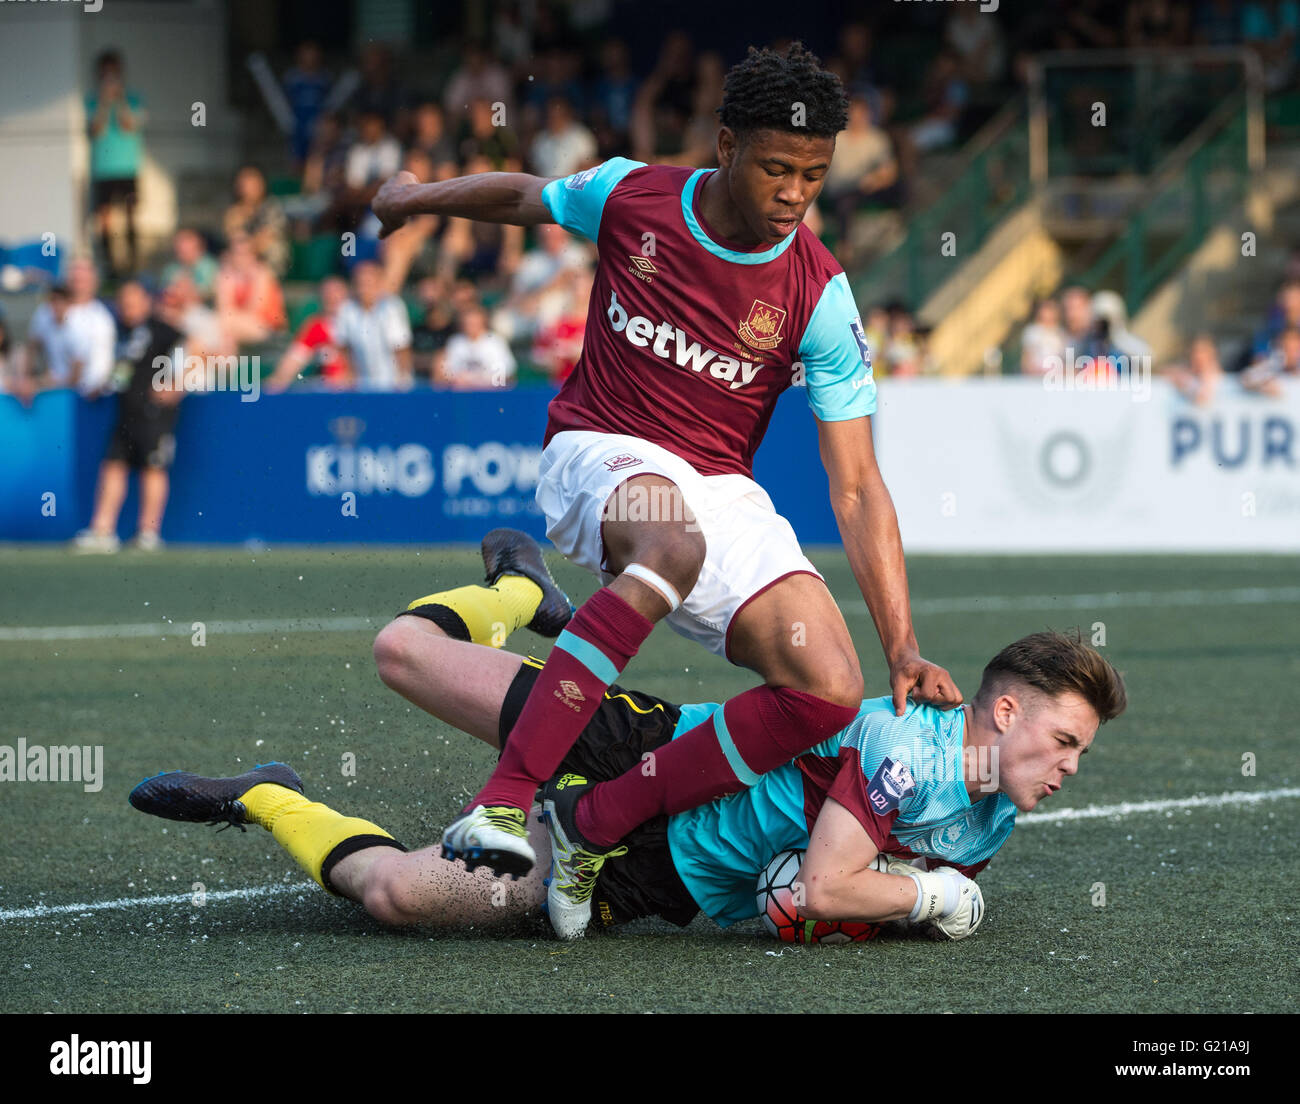 Hong Kong, Hong Kong SAR, China. 22nd May, 2016. HKFC Citibank Soccer sevens Cup final Aston Villa vs West Ham United. Aston Villa take the cup. Goalkeeper MATIJA SARKIC is stretchered away after an injury sustained during a great save.He is replaced by JORDAN COX (Pictured L) who was offered a West Ham United away kit jersey to distinguish him as the goalie for Aston Villa. © Jayne Russell/ZUMA Wire/Alamy Live News Stock Photo